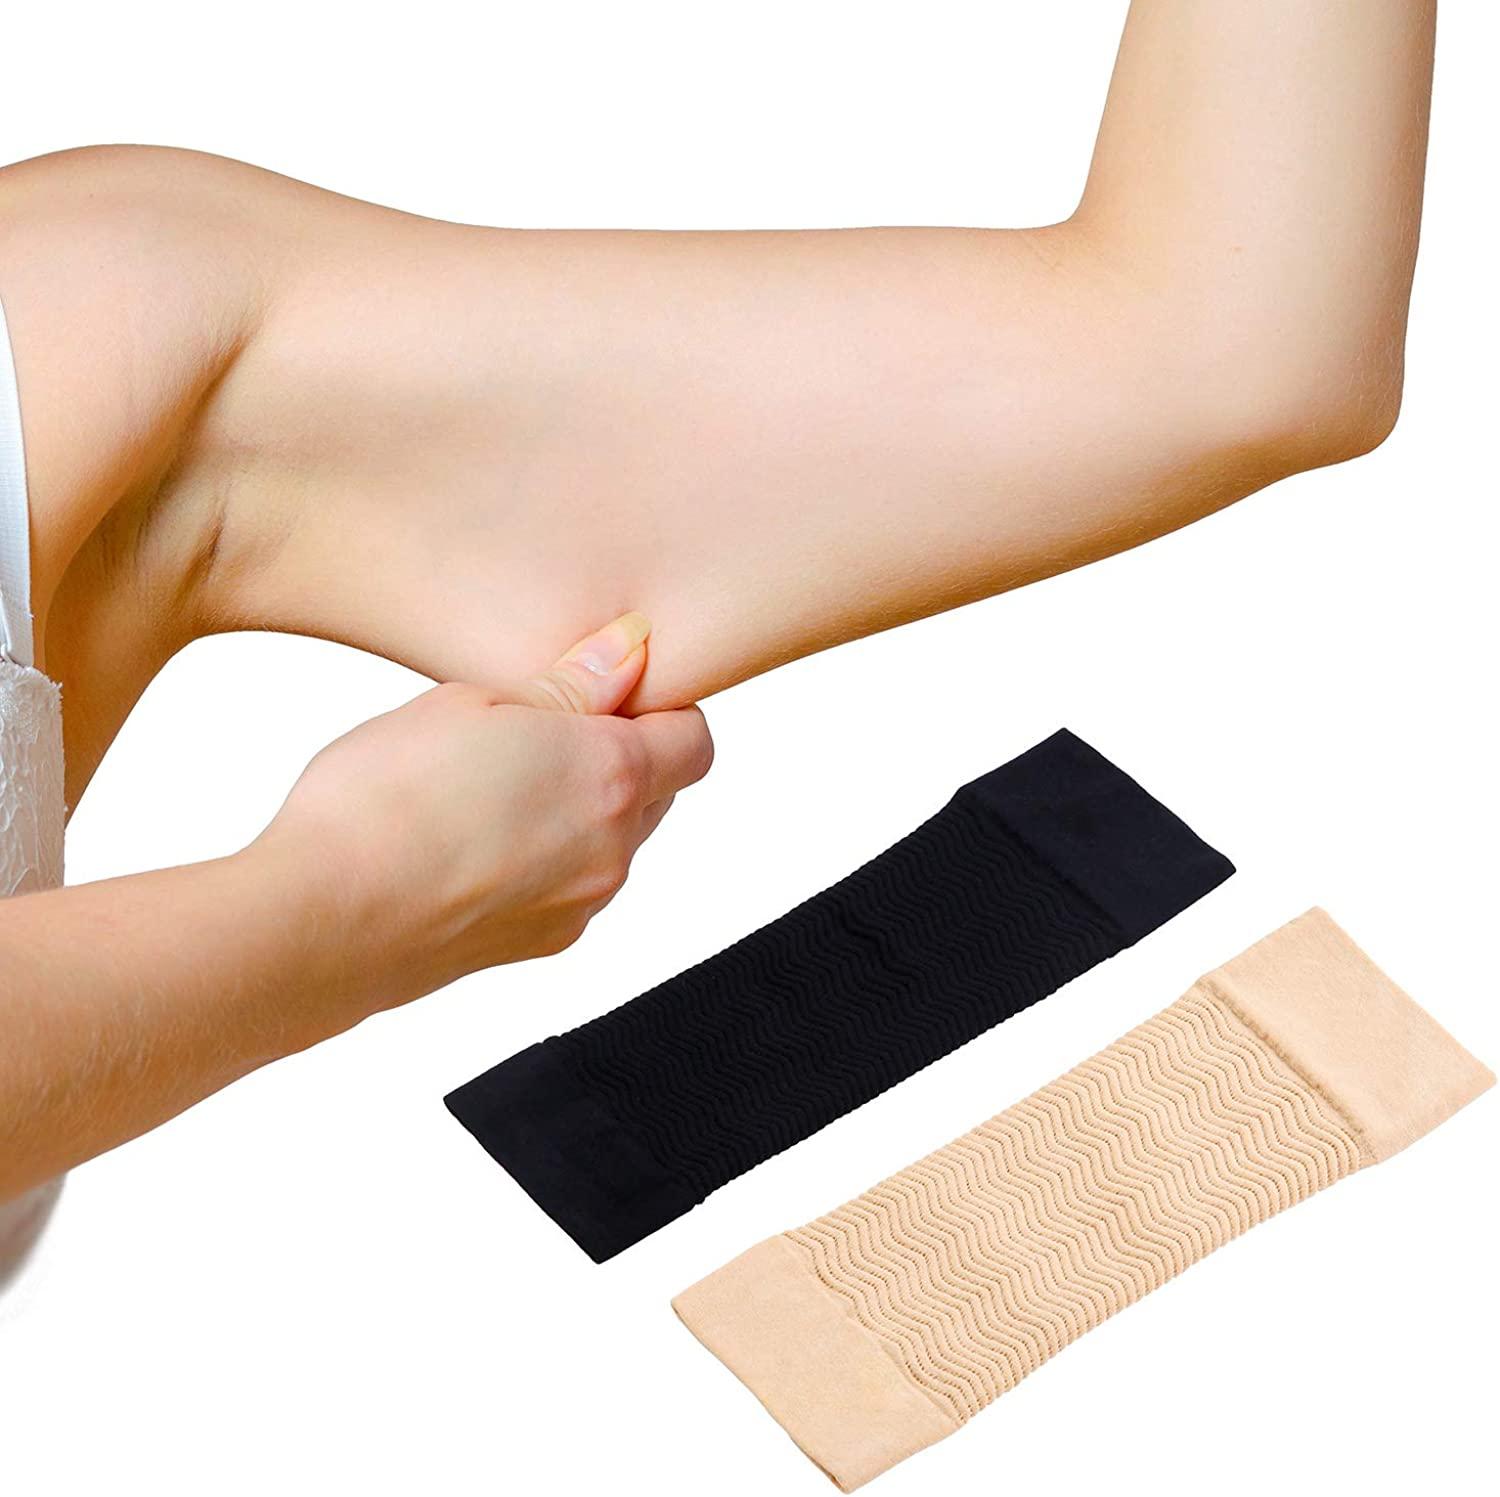 2 Pairs Arm Slimming Shapers Sleeves for Women - Upper Arm Compression  Sleeve To Tone Arms Arm Wraps for Flabby Arms Helps Shape Upper Arms 